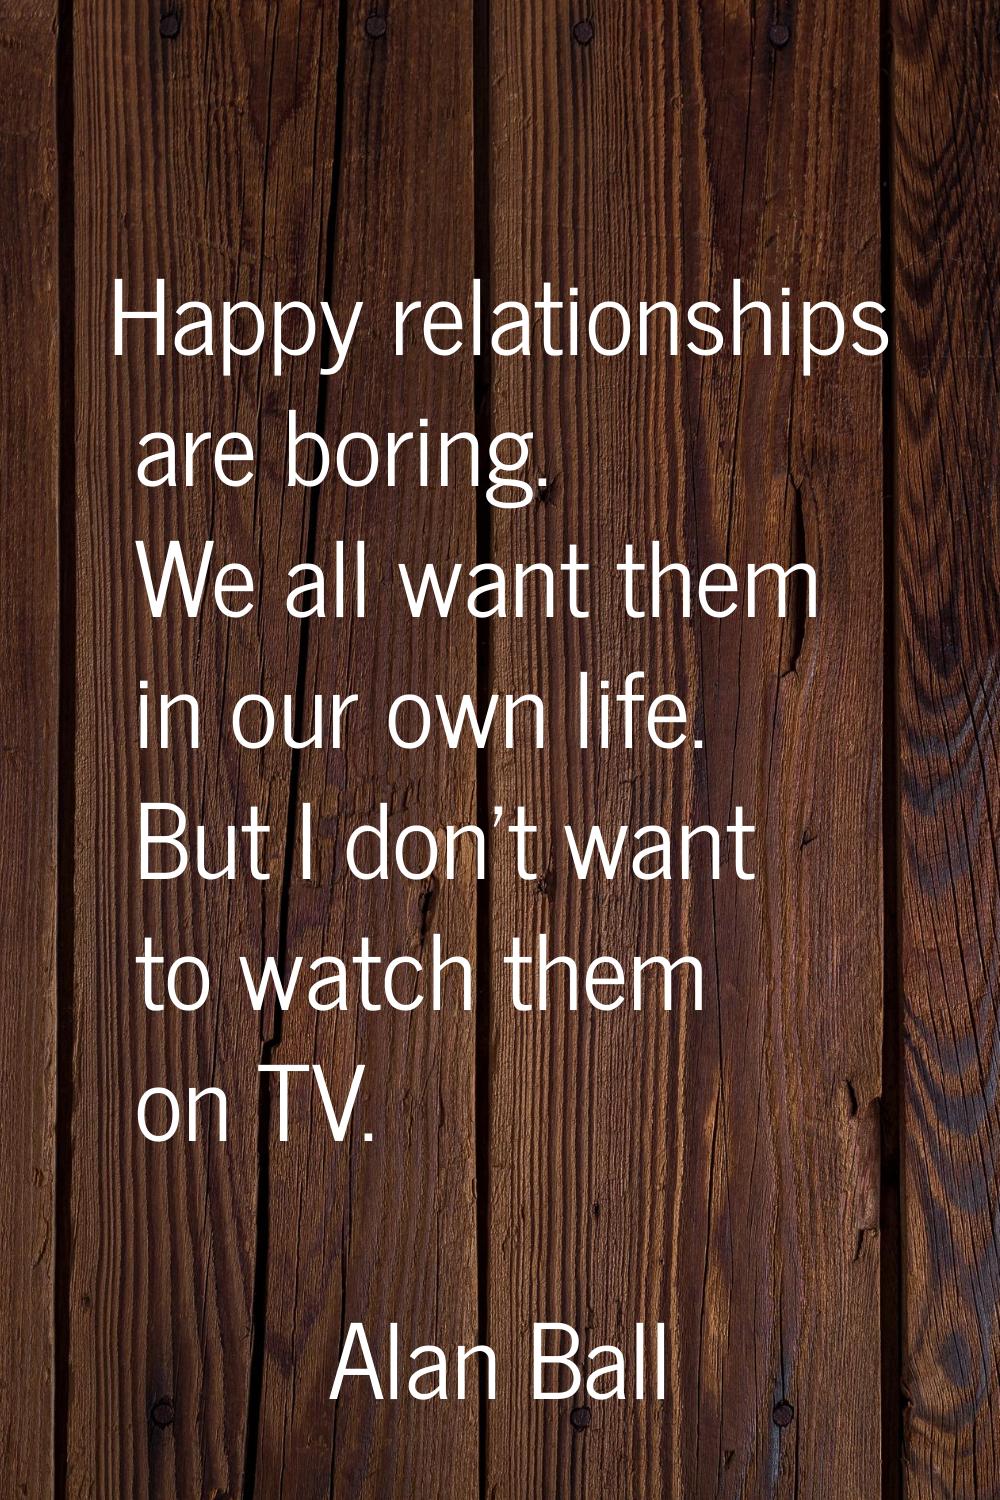 Happy relationships are boring. We all want them in our own life. But I don't want to watch them on